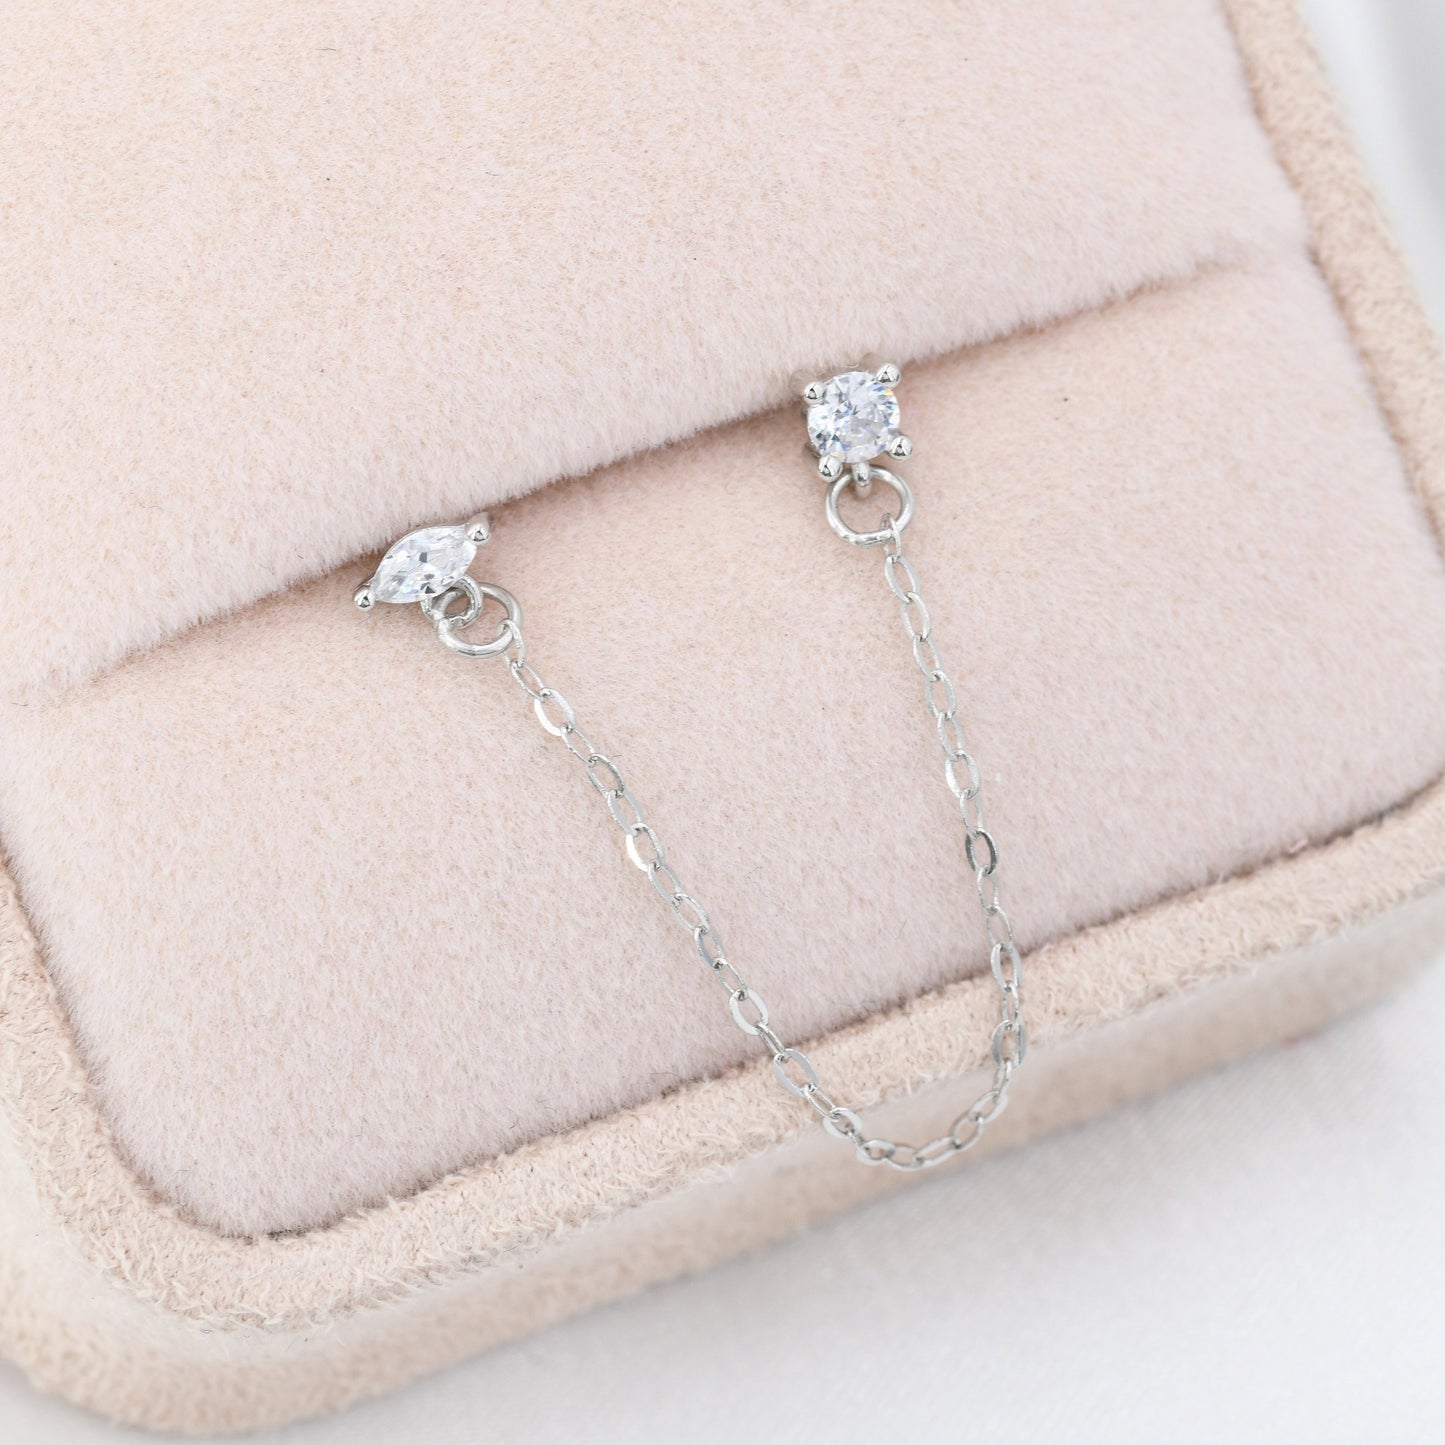 Sterling Silver Chained Earrings for Multiple Piercings, Silver or Gold, Marquise and Diamond Cut CZ Earrings, Asymmetric Stacking Earrings